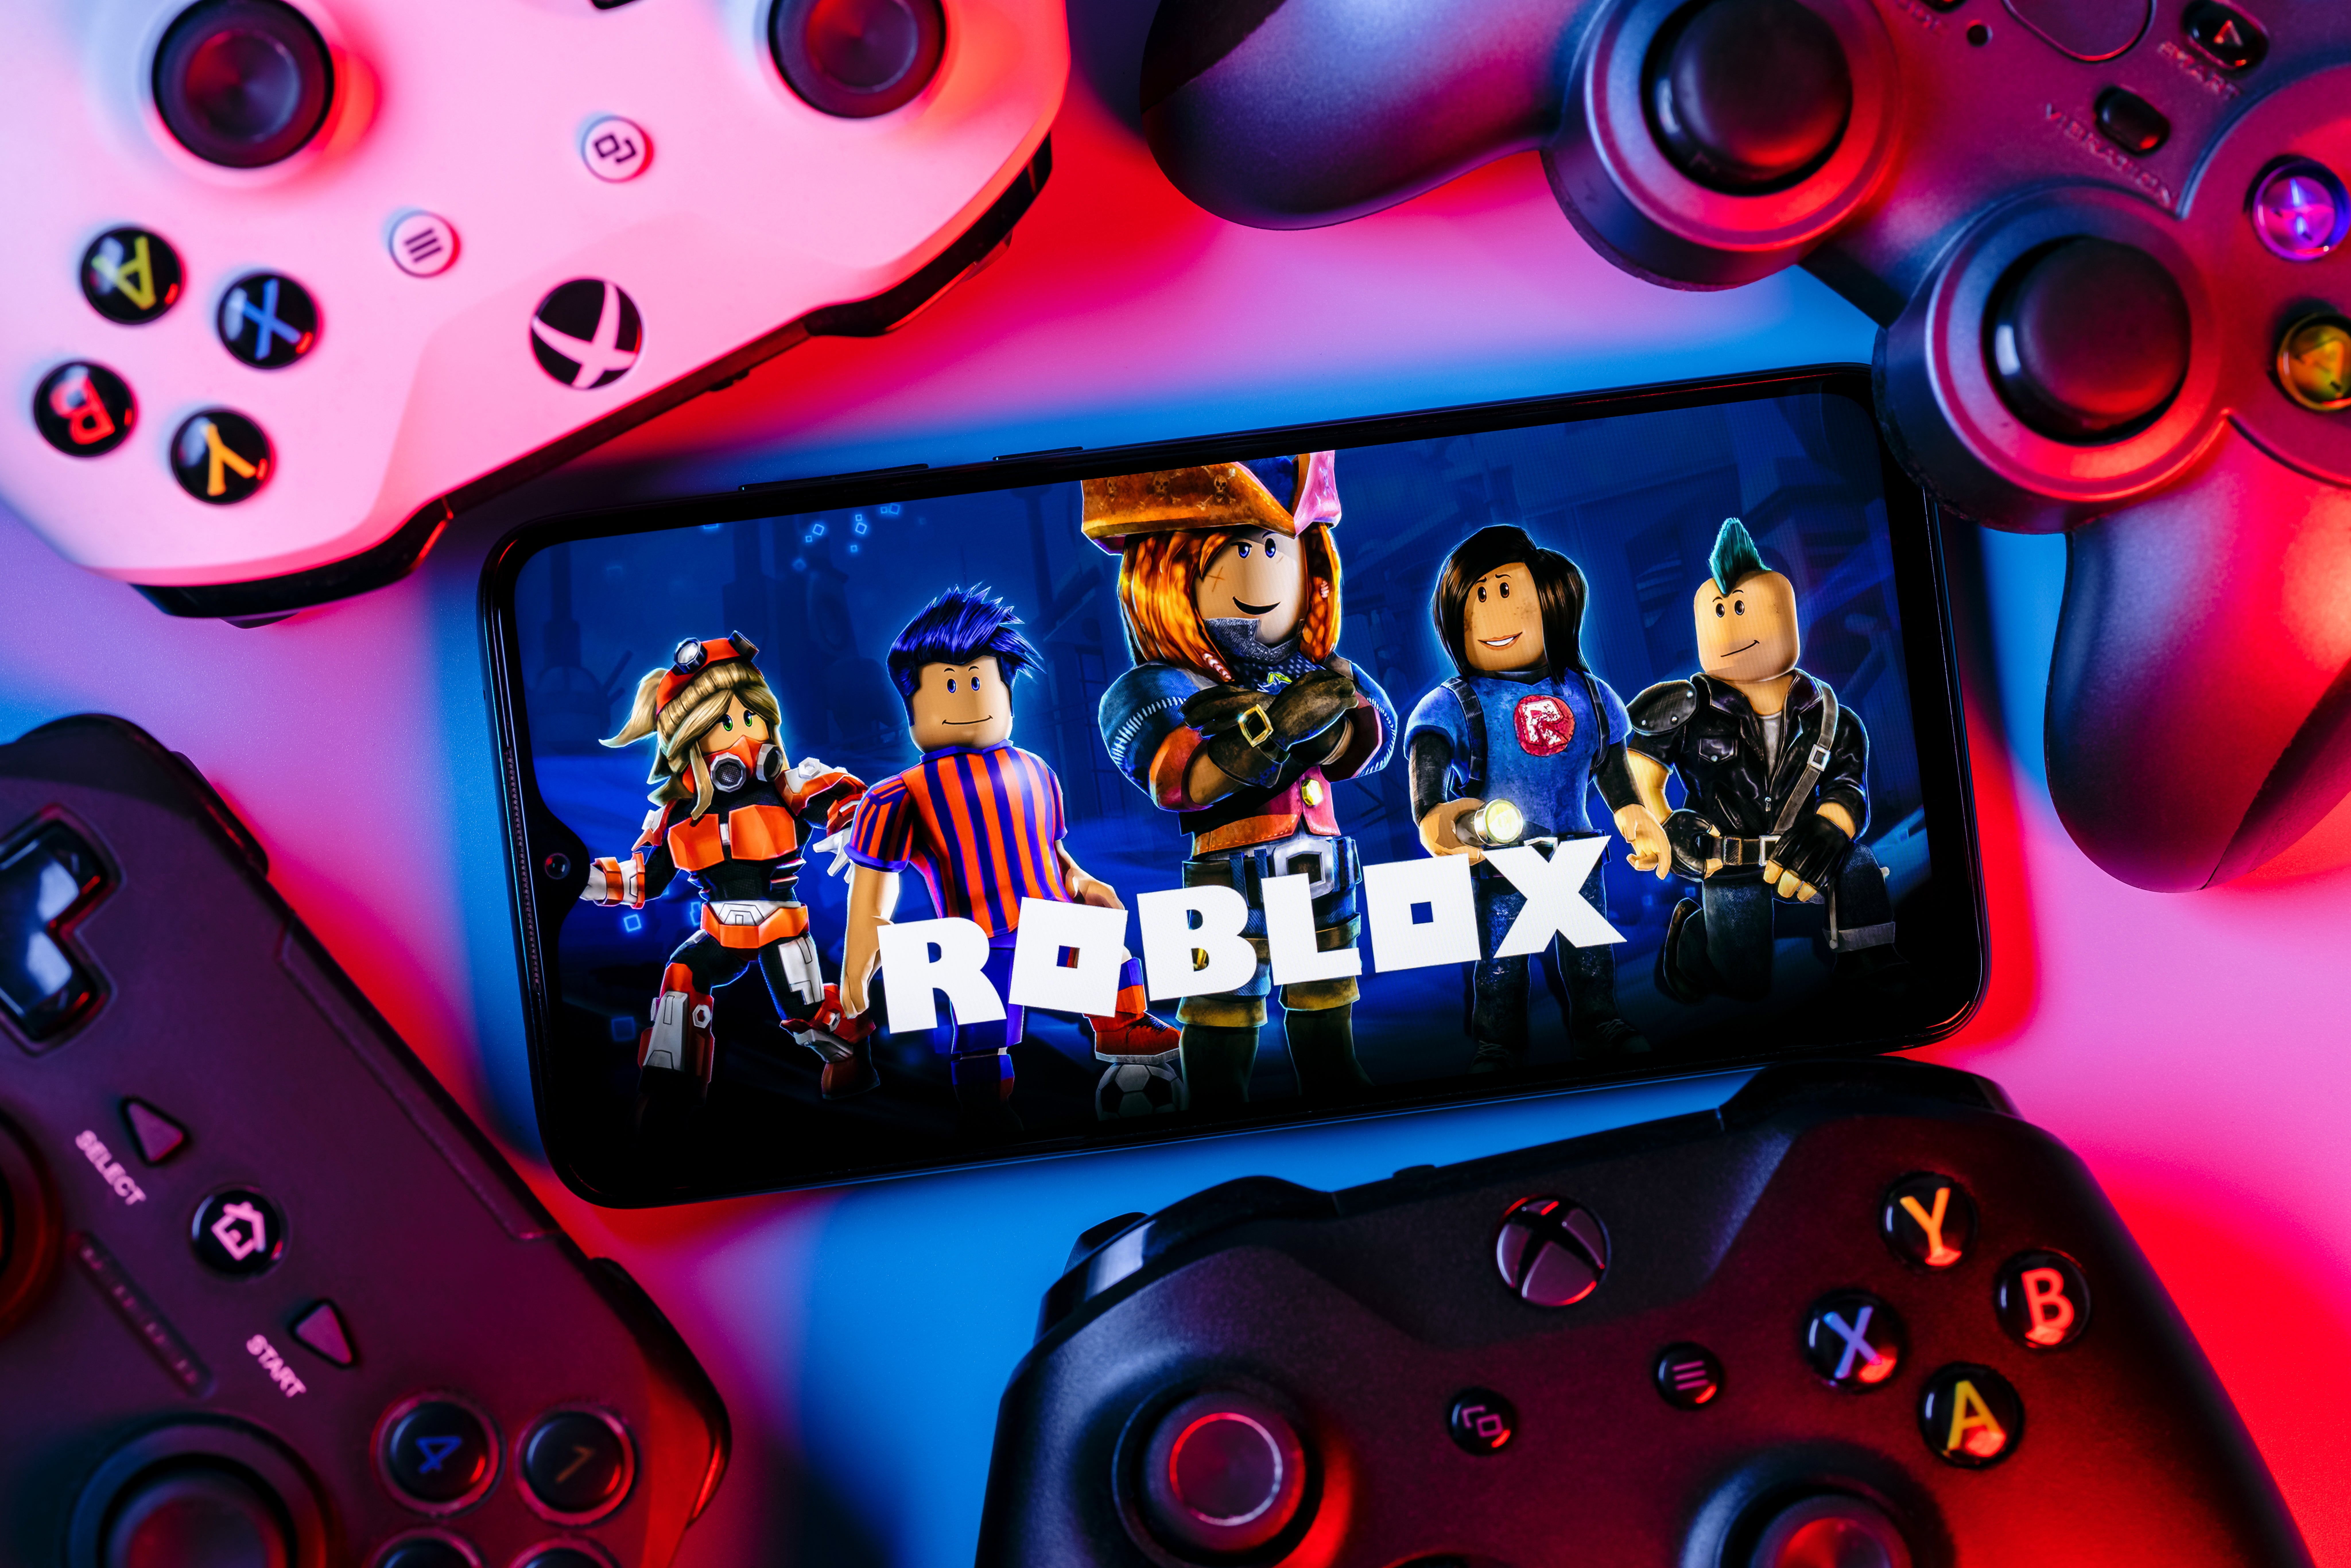 Roblox Stock Benefits From Kid-Centric Games, Social Platform